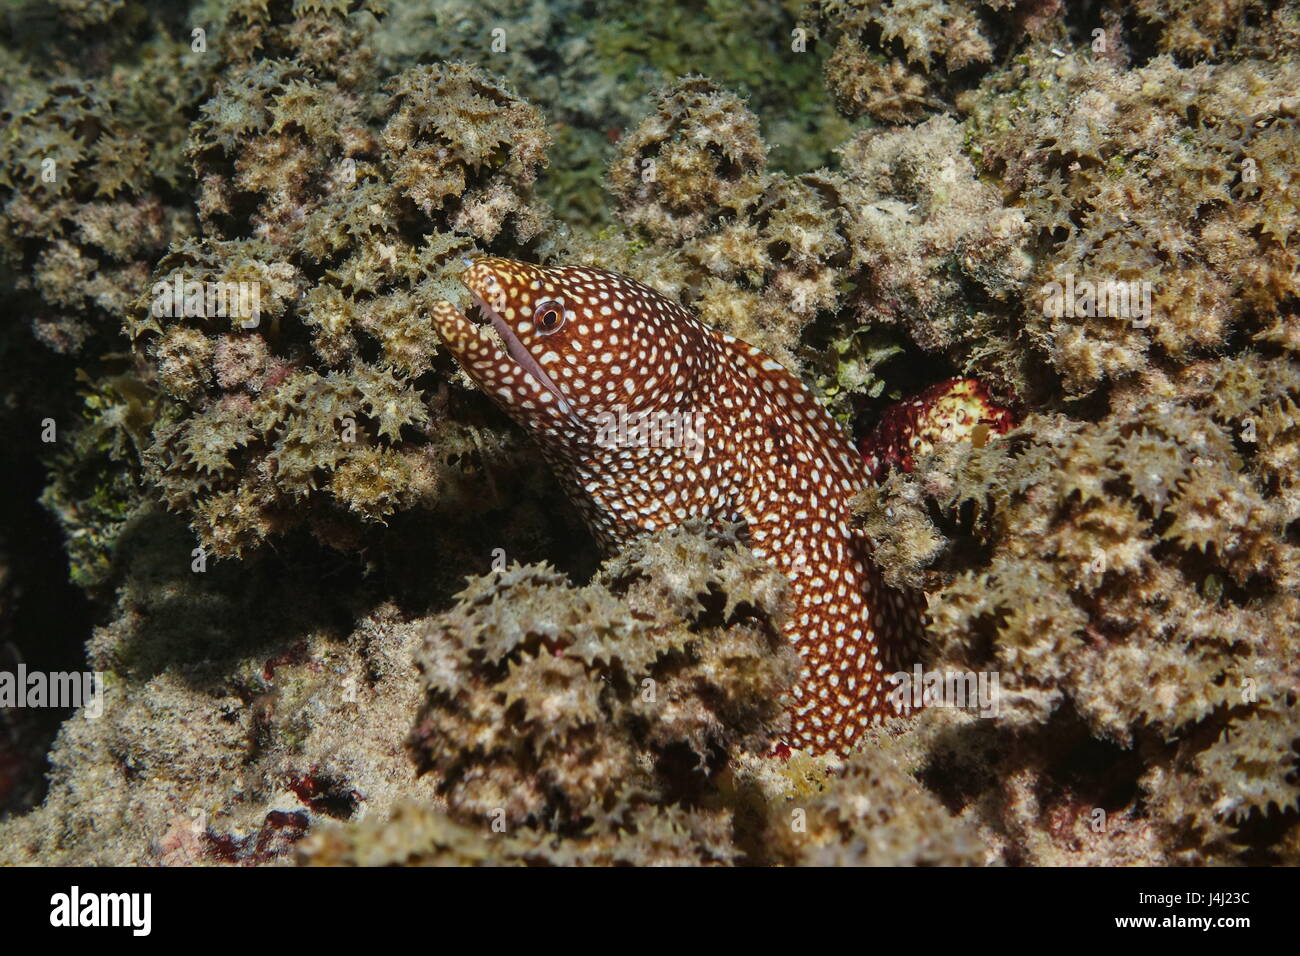 A turkey moray, Gymnothorax meleagris, also known as the guineafowl moray or whitemouth moray, underwater in the lagoon of Bora Bora, Pacific ocean Stock Photo